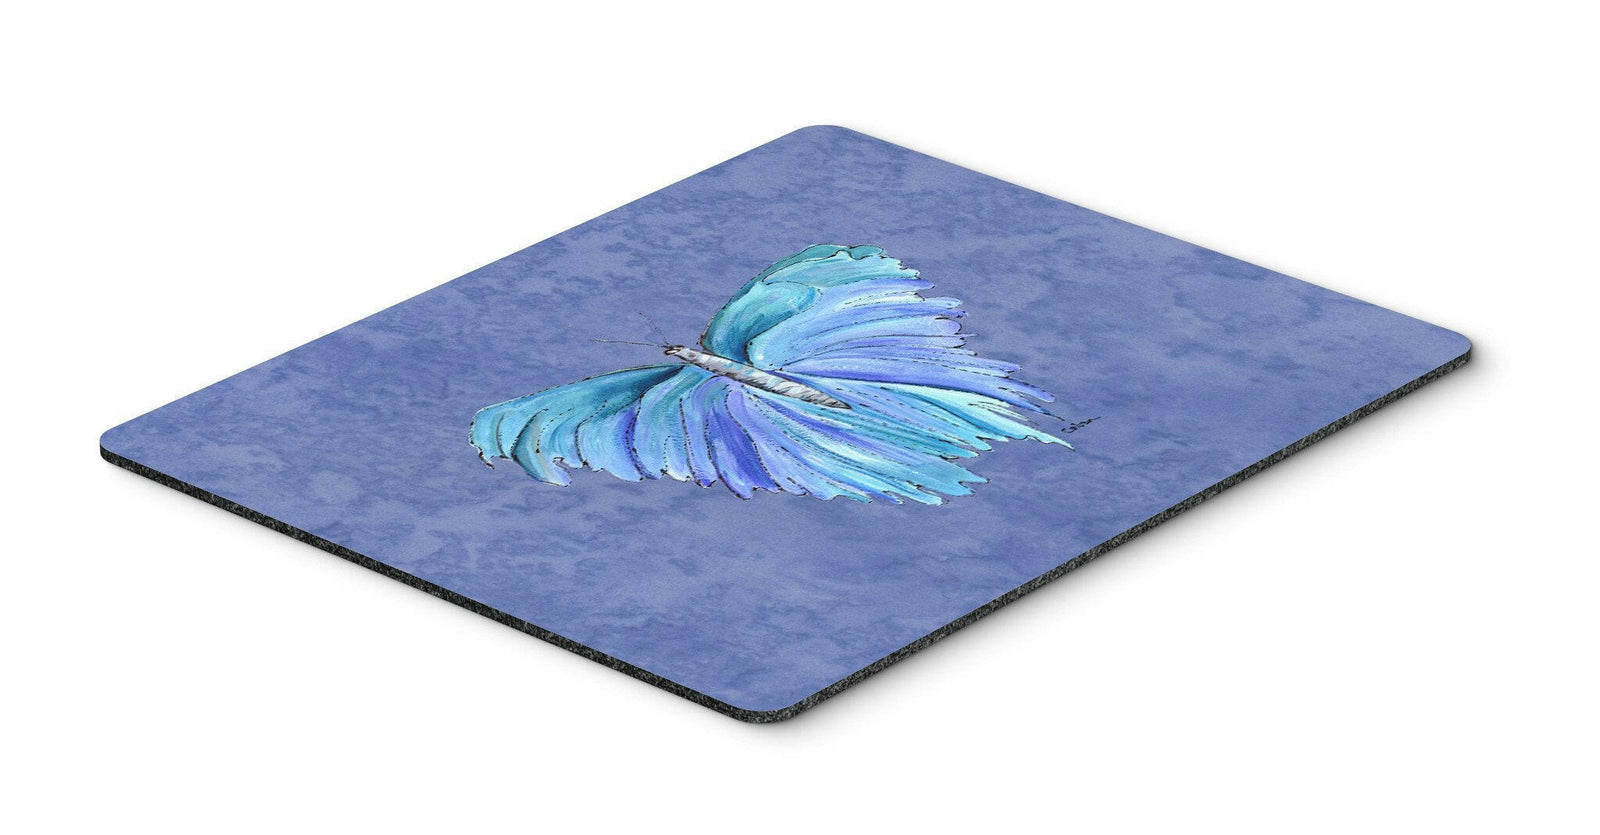 Butterfly on Slate Blue Mouse Pad, Hot Pad or Trivet by Caroline's Treasures